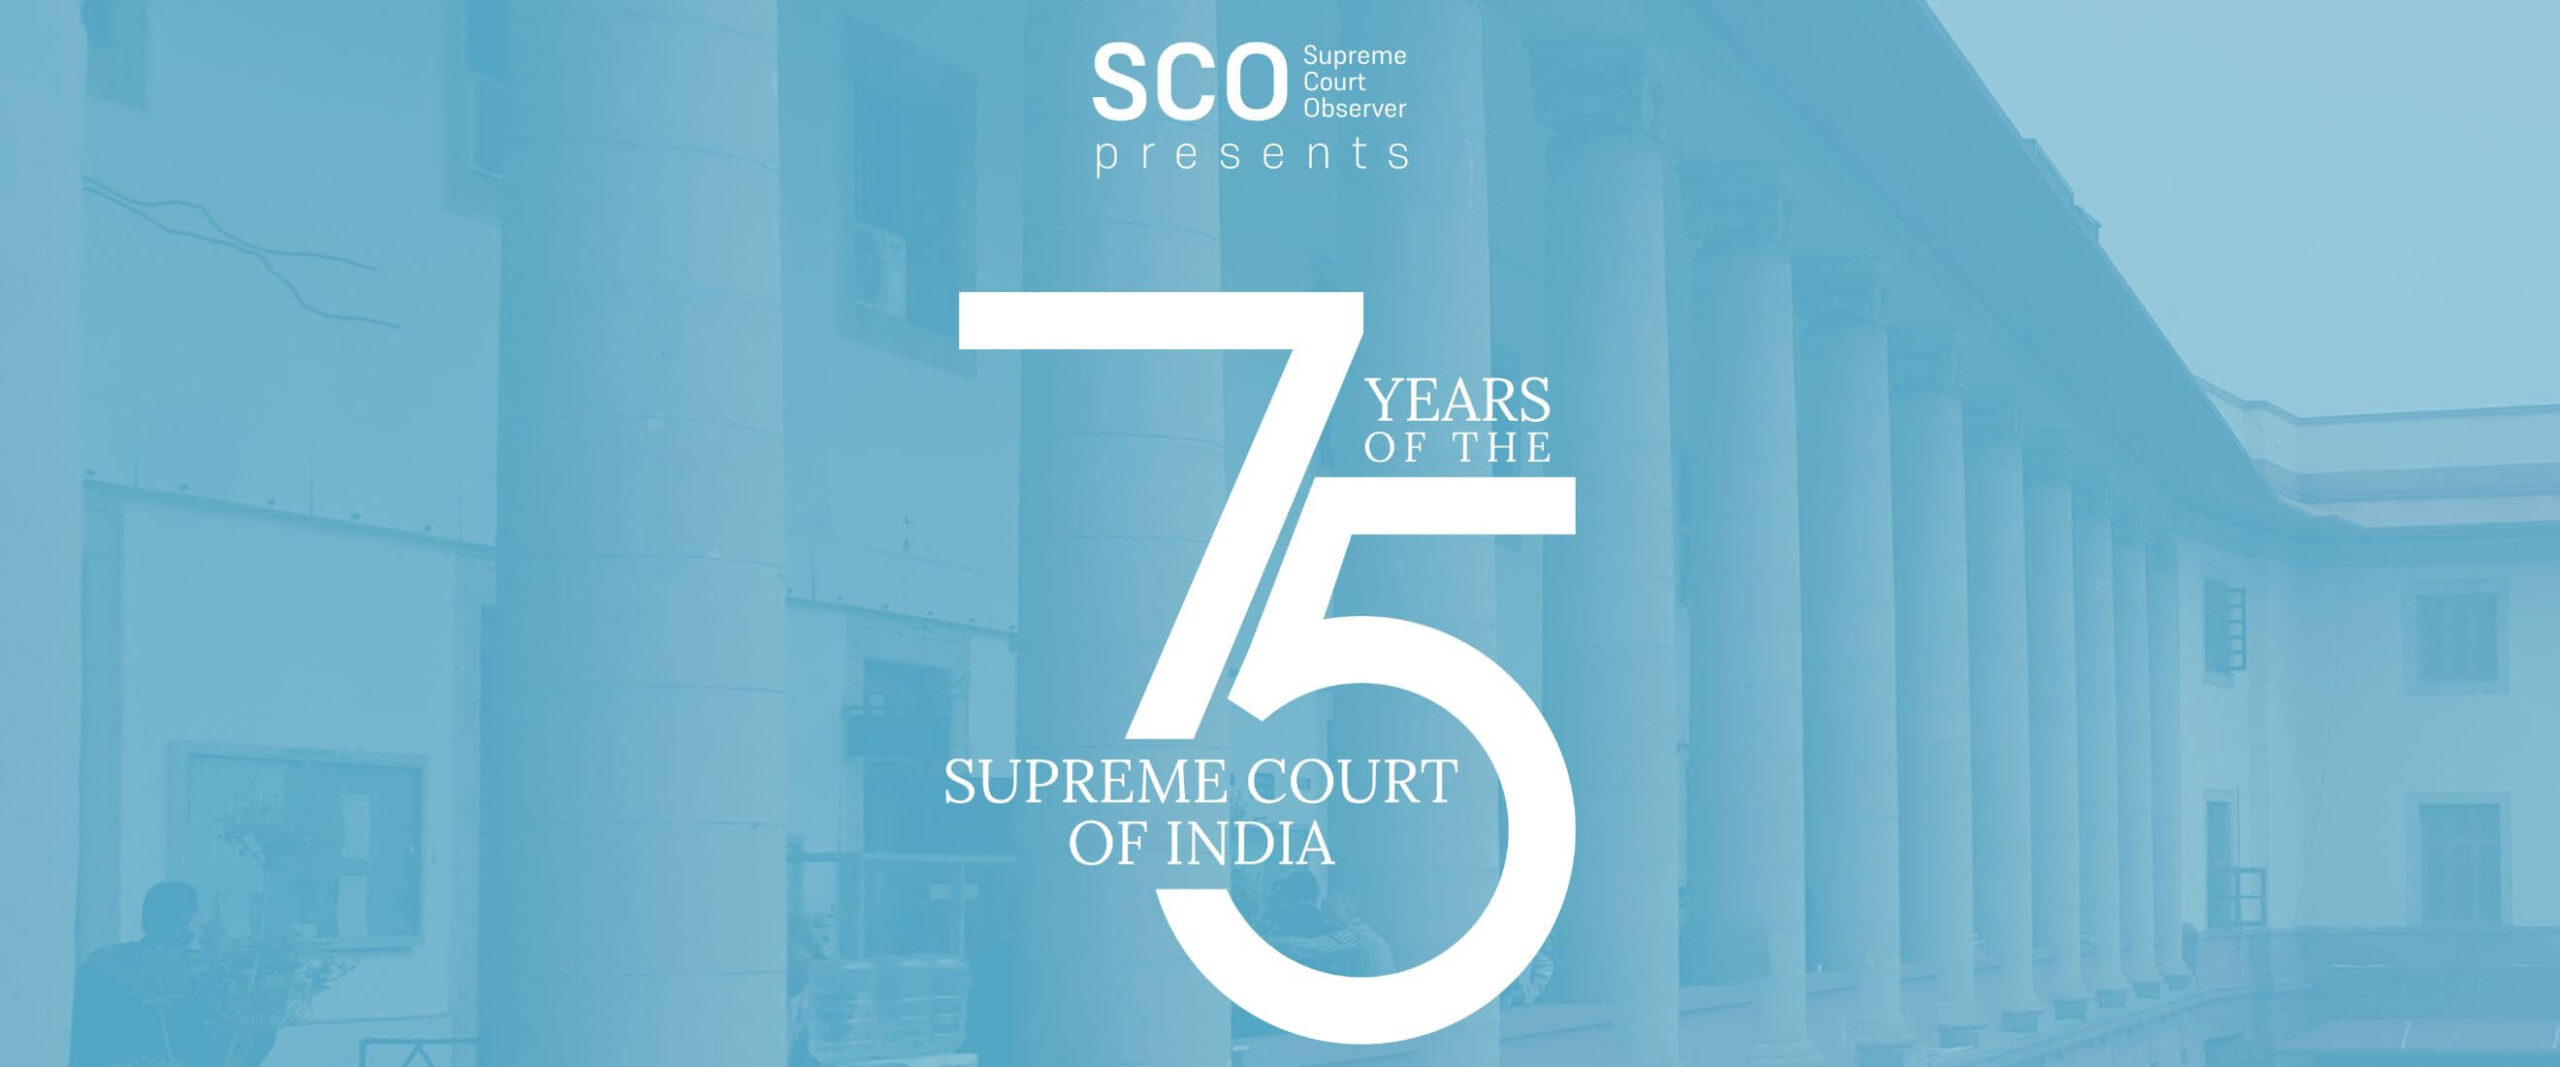 Curator's note Image Featured Image 75 years of the Supreme Court